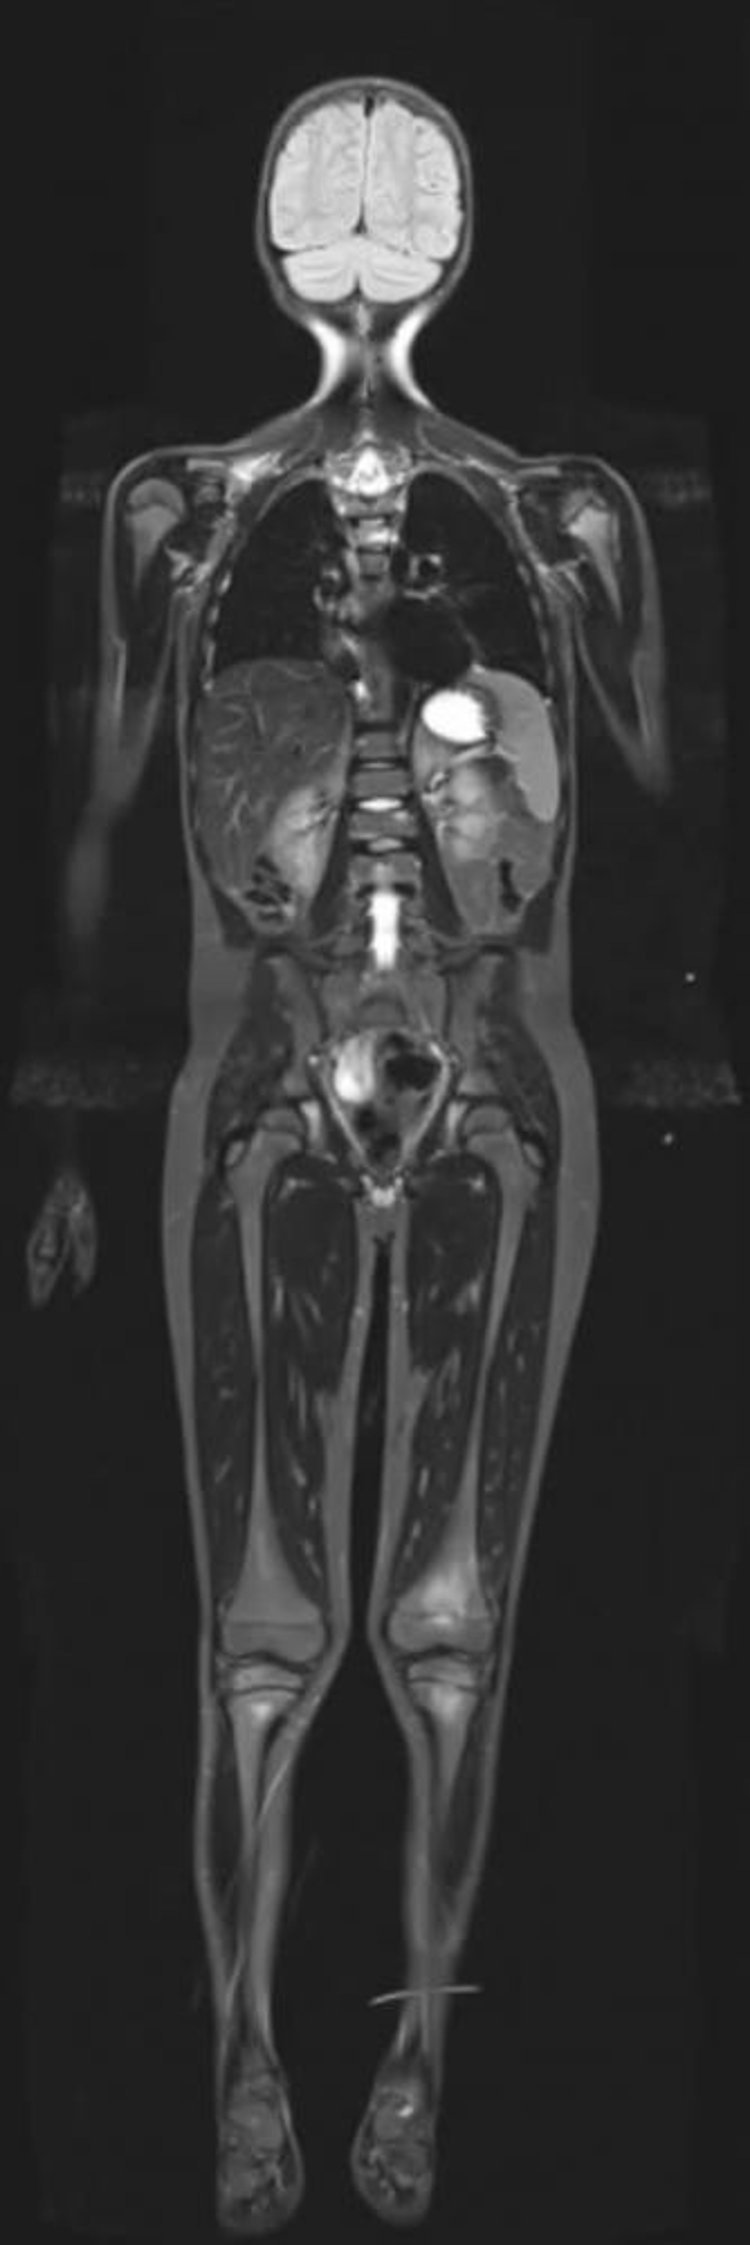 Short T1 Inversion Recovery MRI of the Whole Body